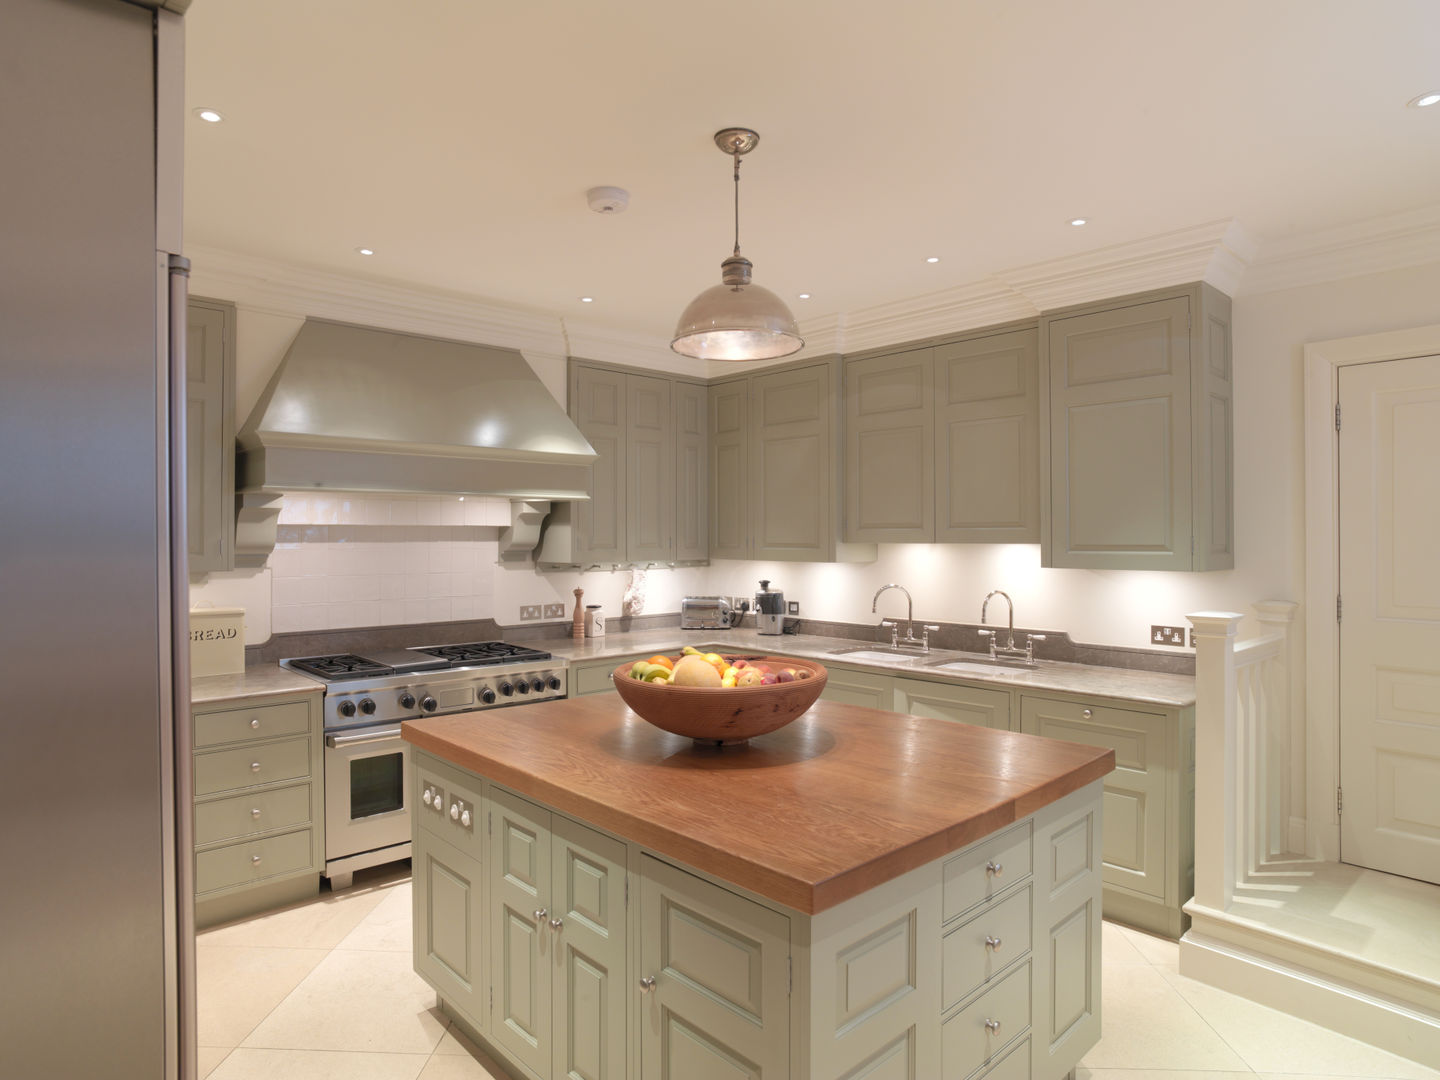 Chelsea Kitchen designed and made by Tim Wood Tim Wood Limited مطبخ Cabinets & shelves